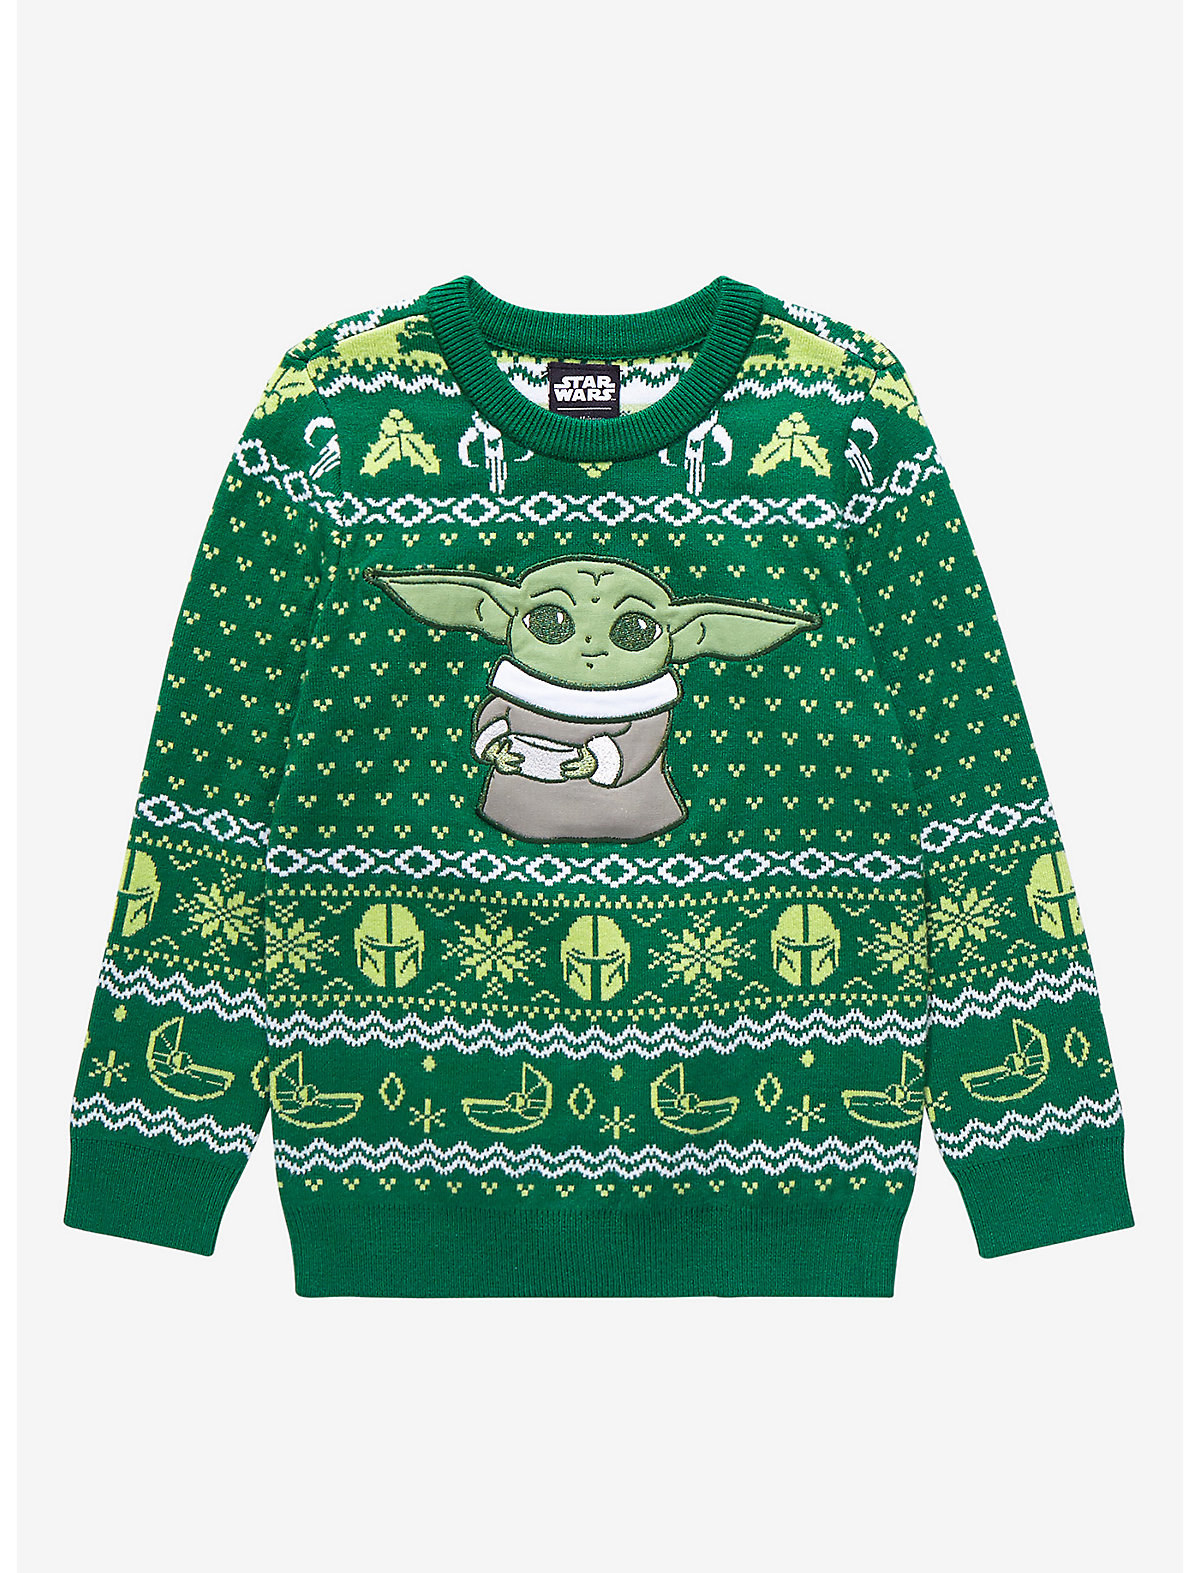 a green holiday sweater with baby yoda on it